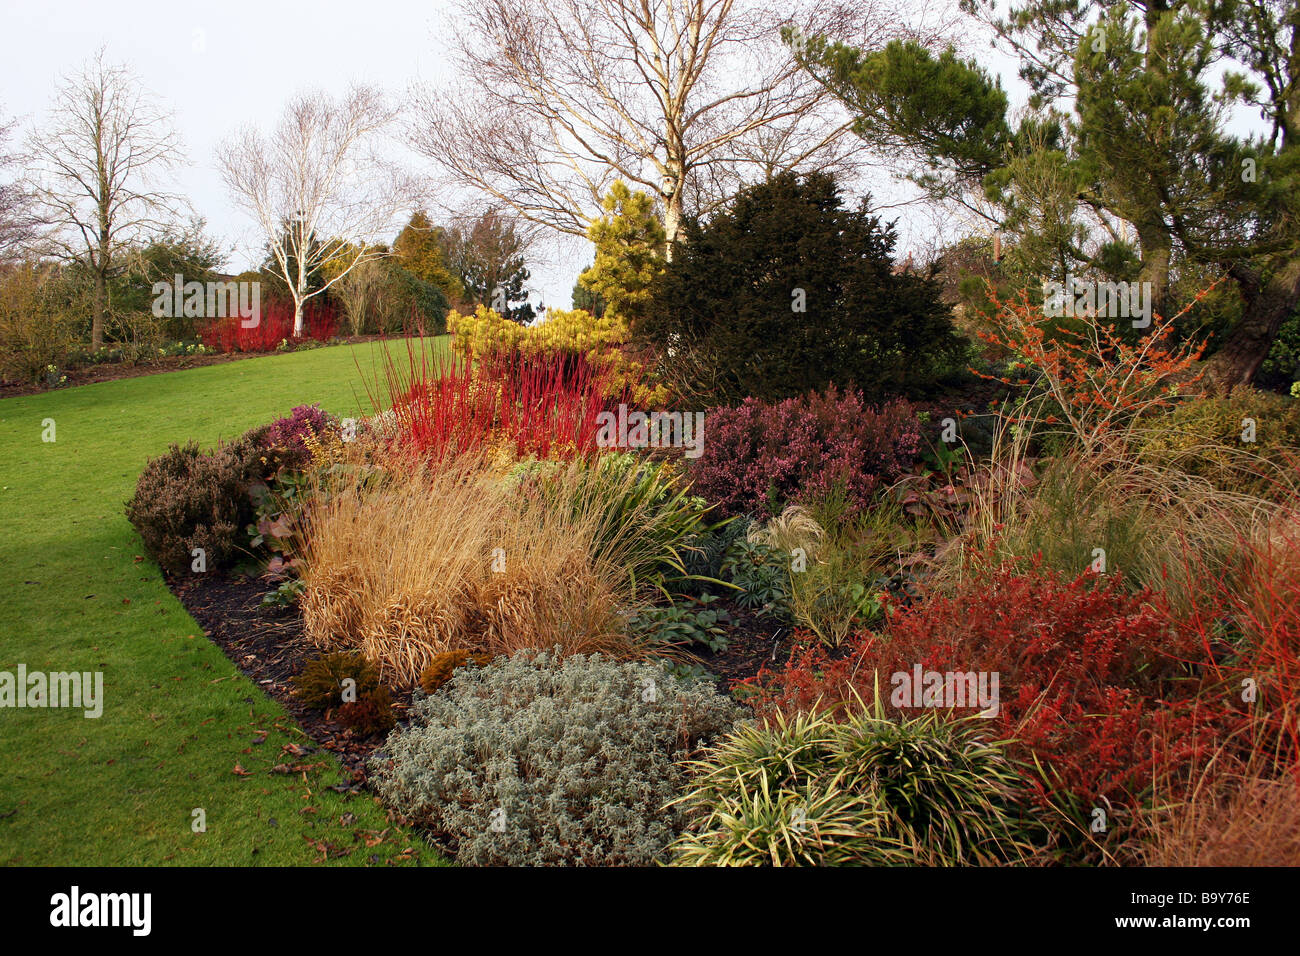 A WINTER BORDER WITH COLOURFUL CORNUS DOGWOODS AND OTHER SHRUBS. RHS HYDE HALL ESSEX UK Stock Photo